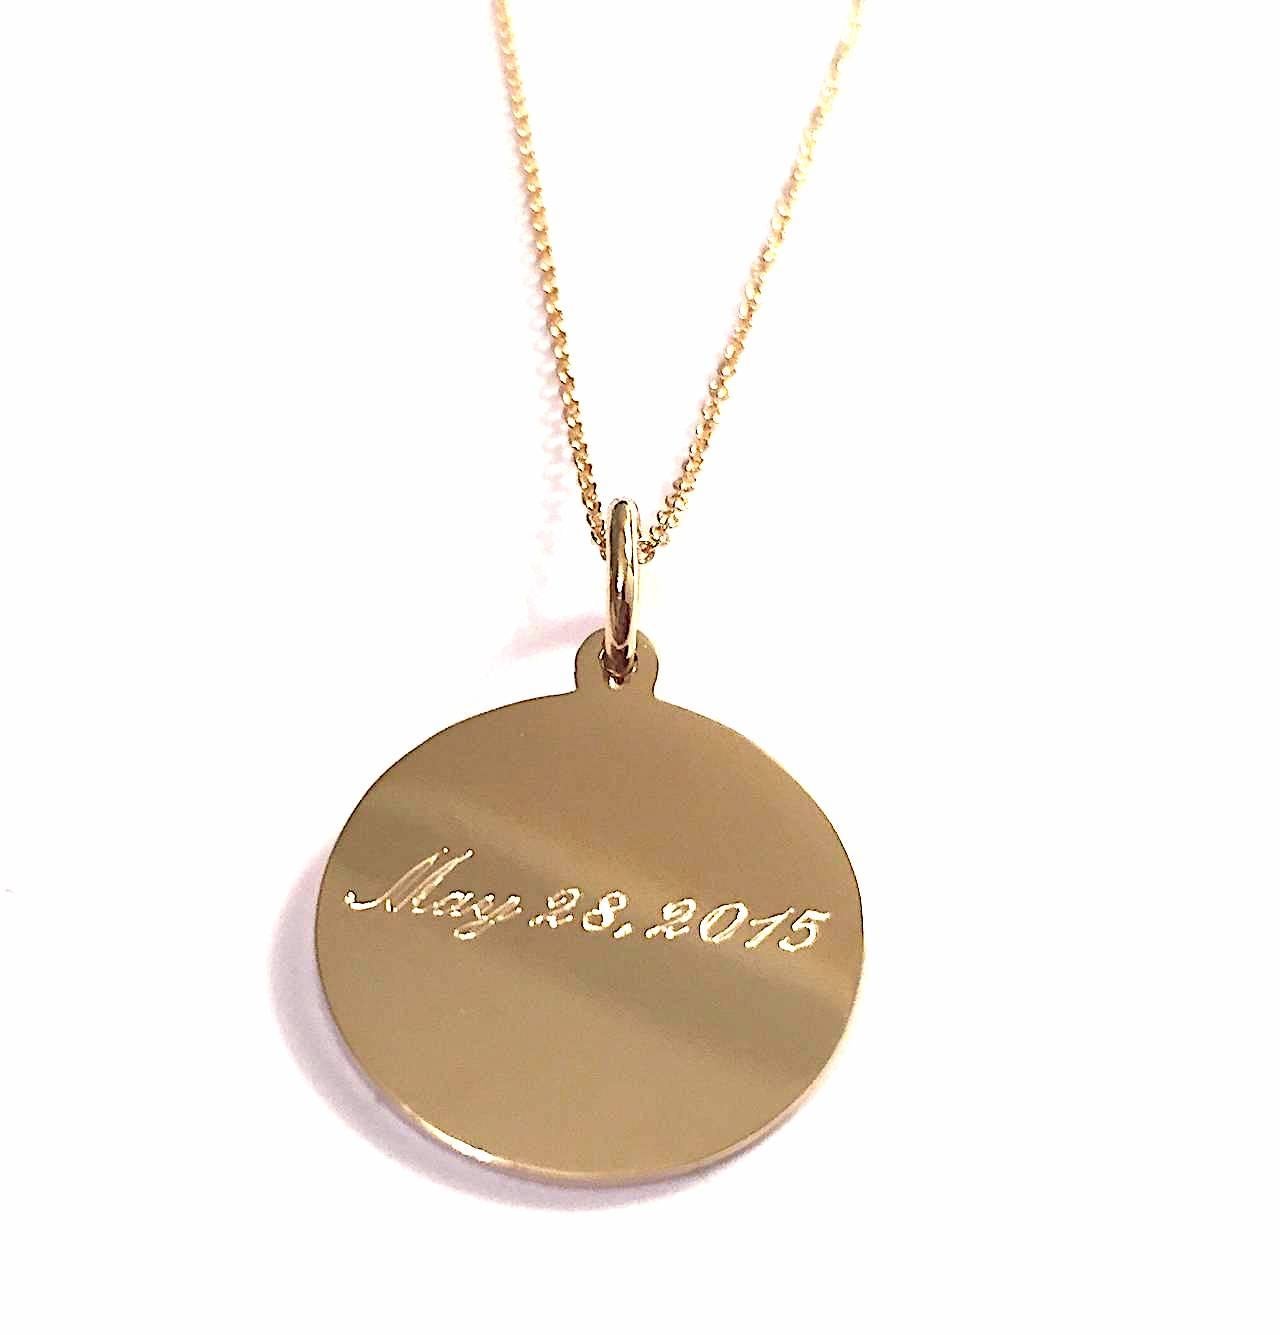 Women's Mini Script Name Necklace with One Name, Gold Plate